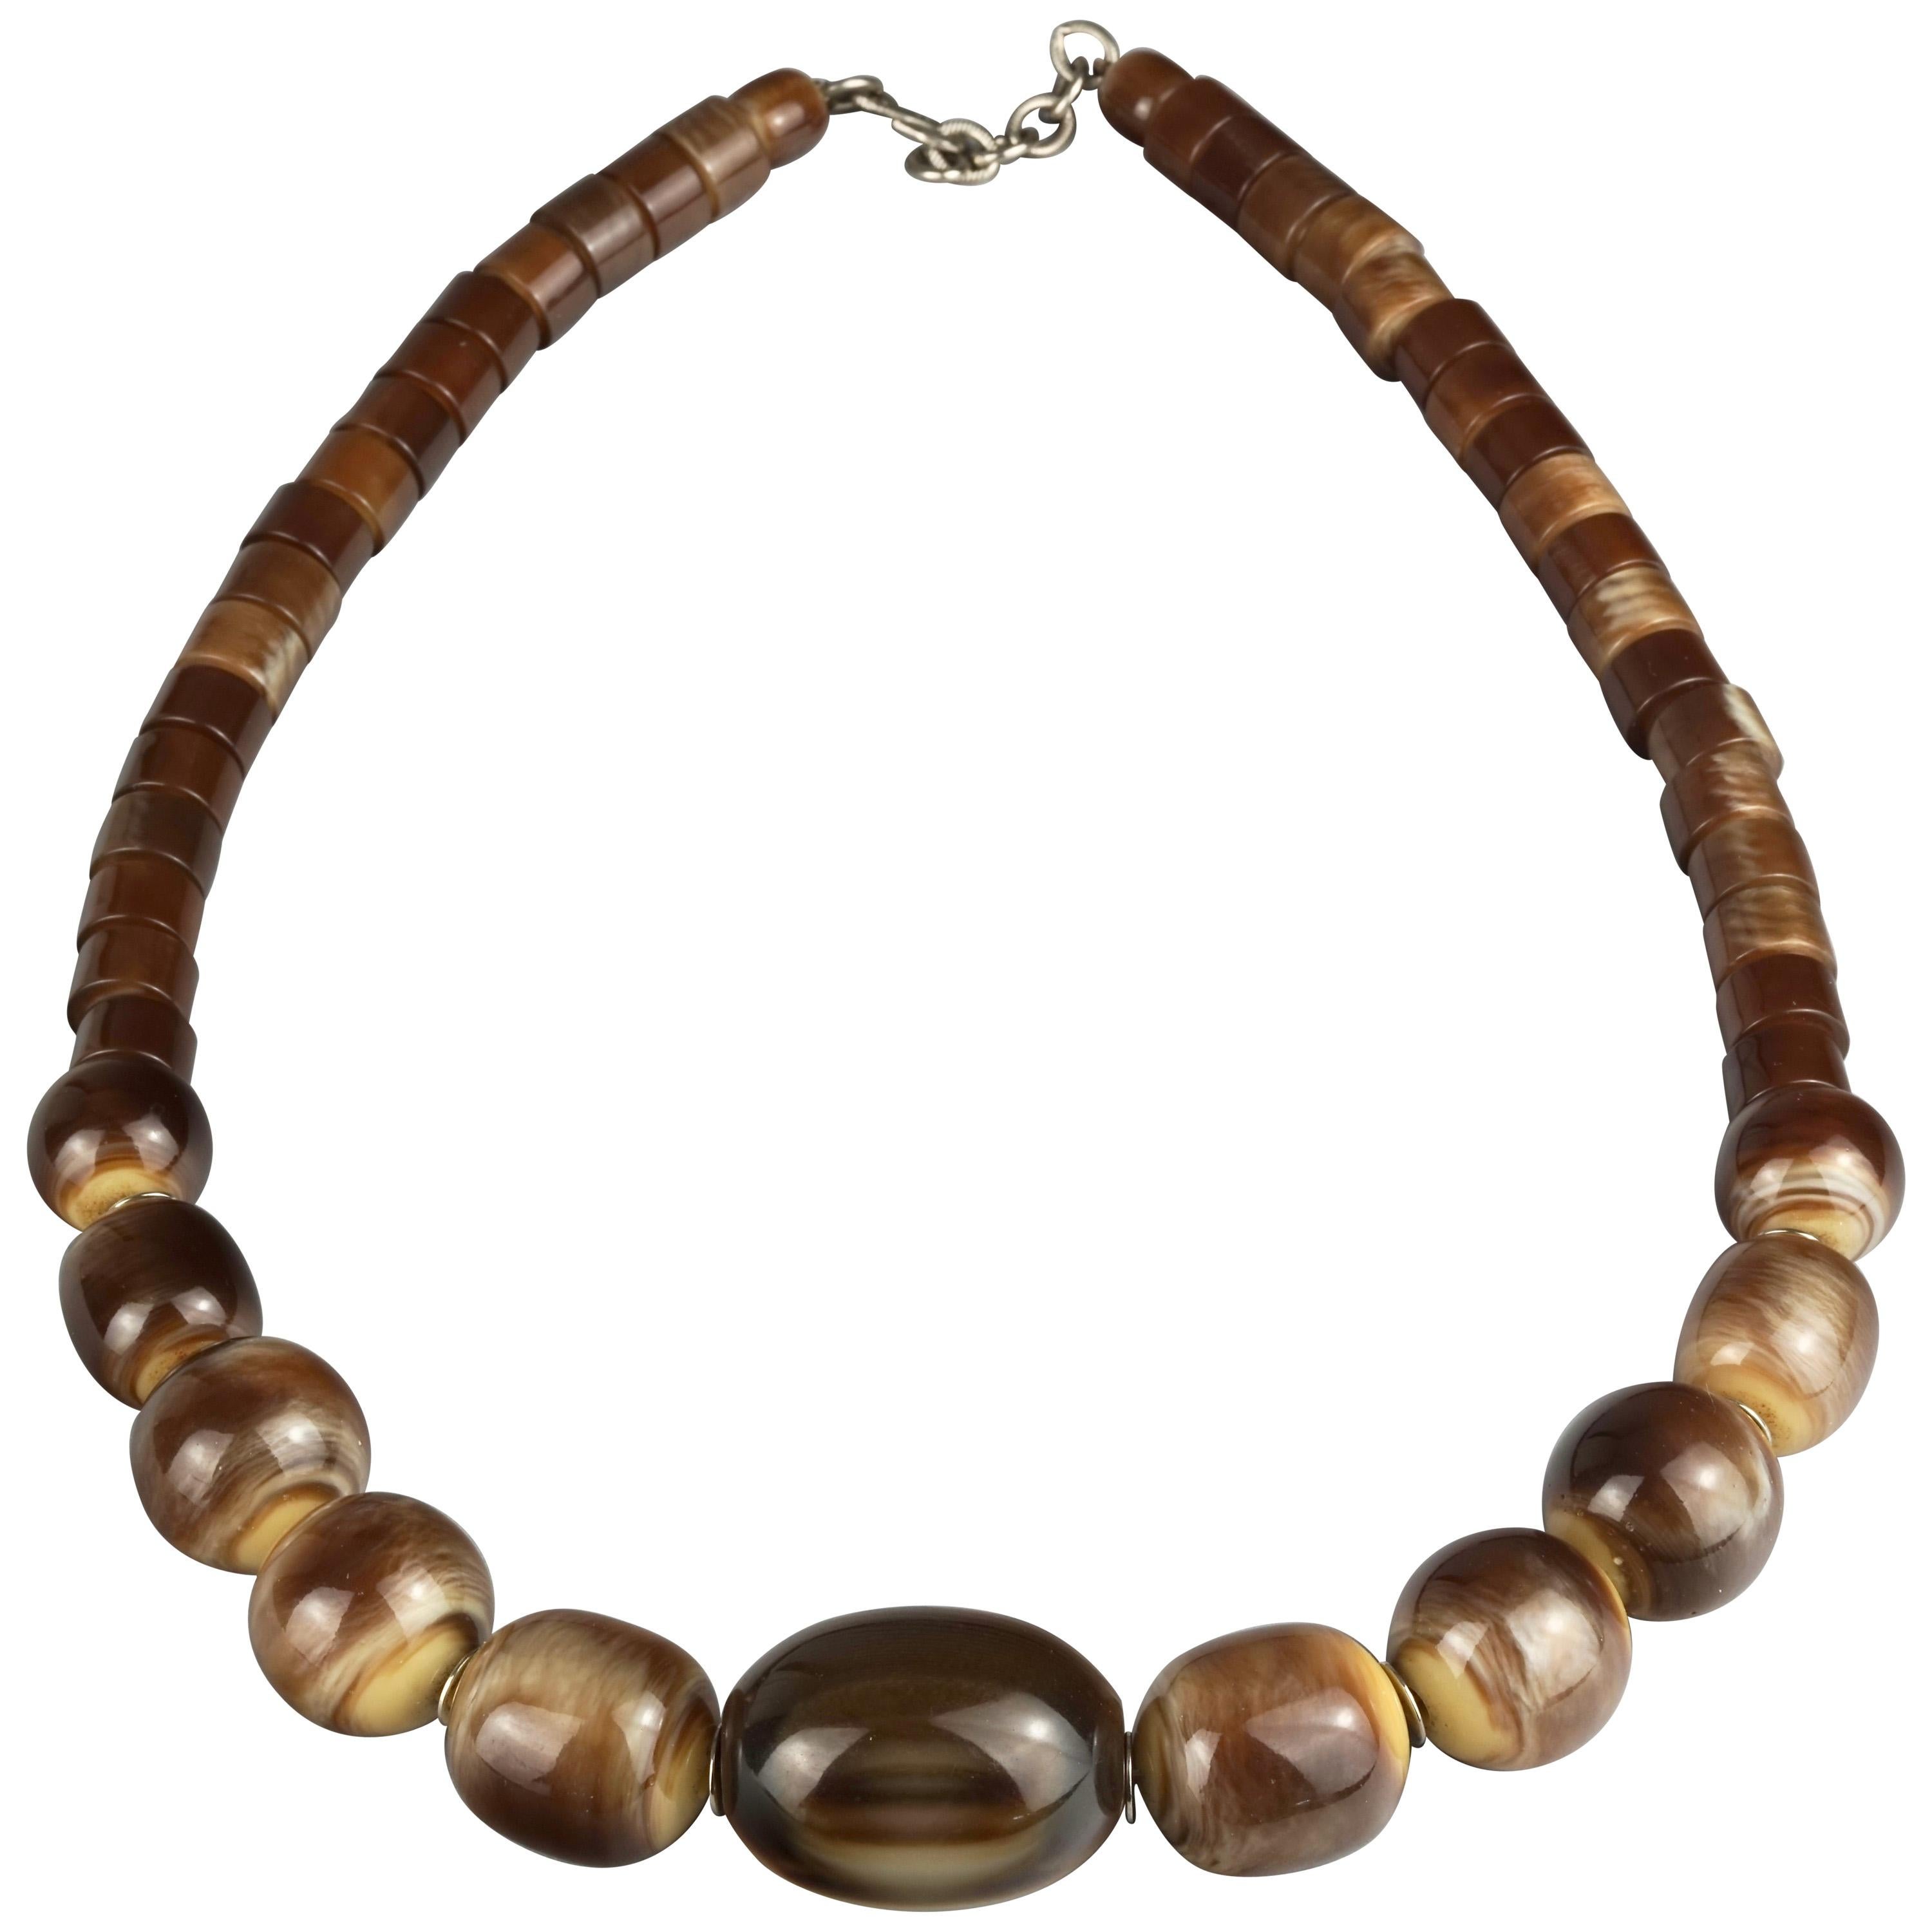 Vintage 1970s YVES SAINT LAURENT Ysl Tigers Eye Necklace by Roger Scemama For Sale